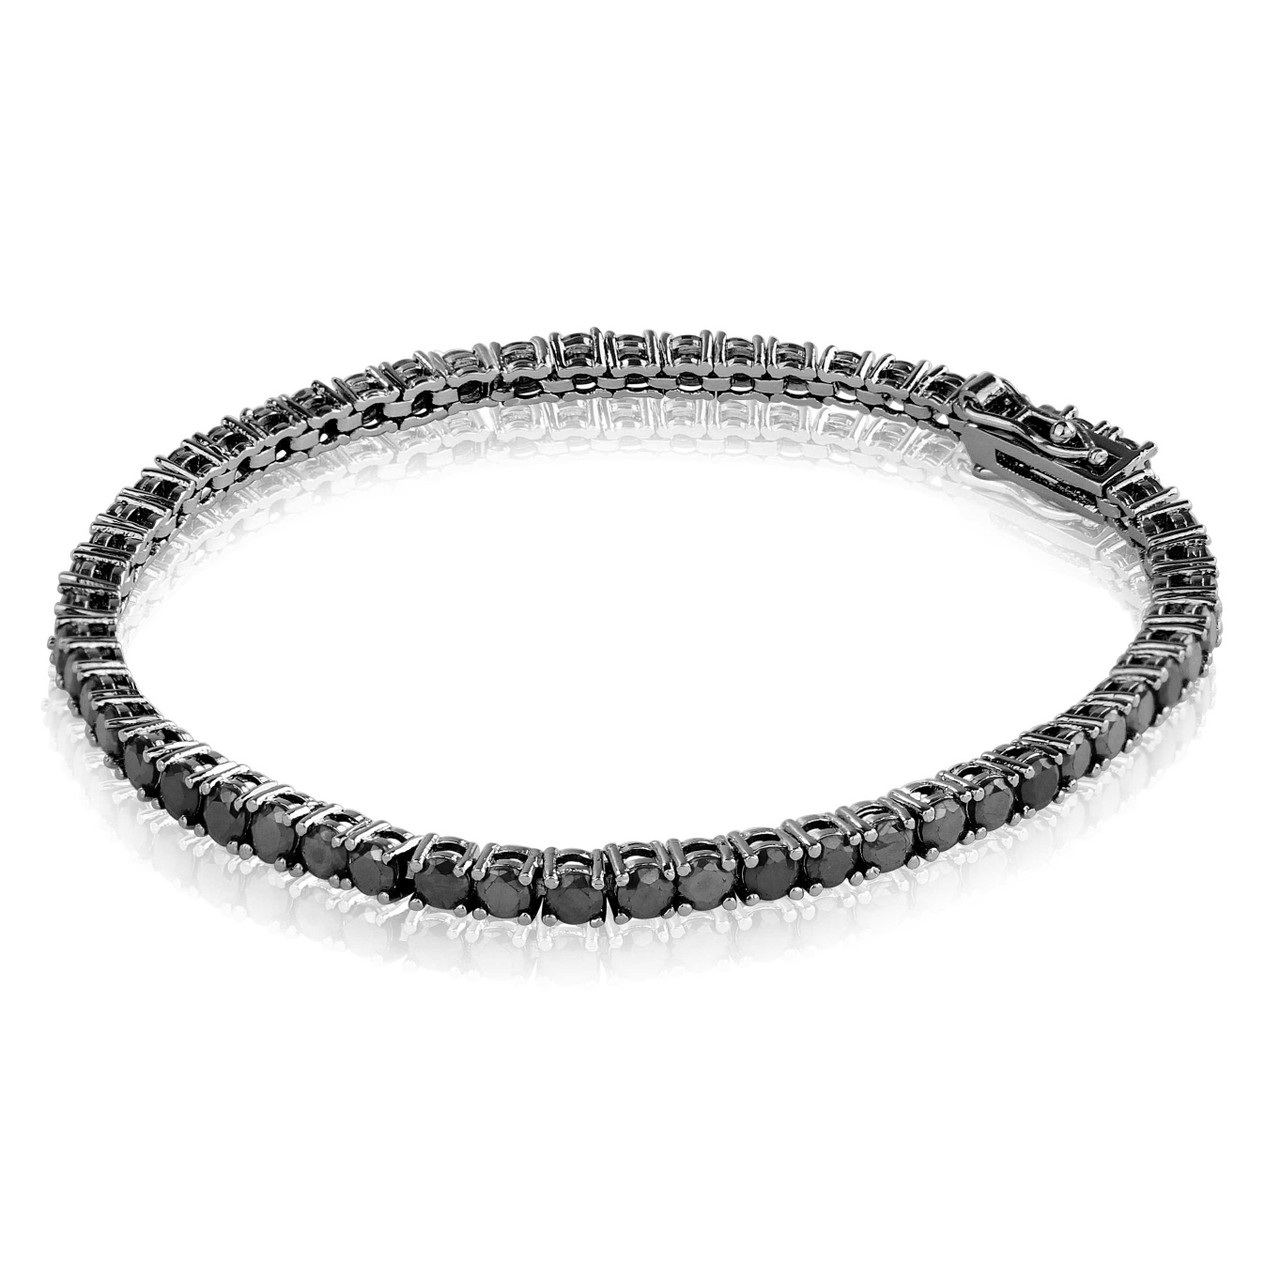 Solid .925 Sterling Silver CZ Tennis Bracelet 7.5 7.5 inches